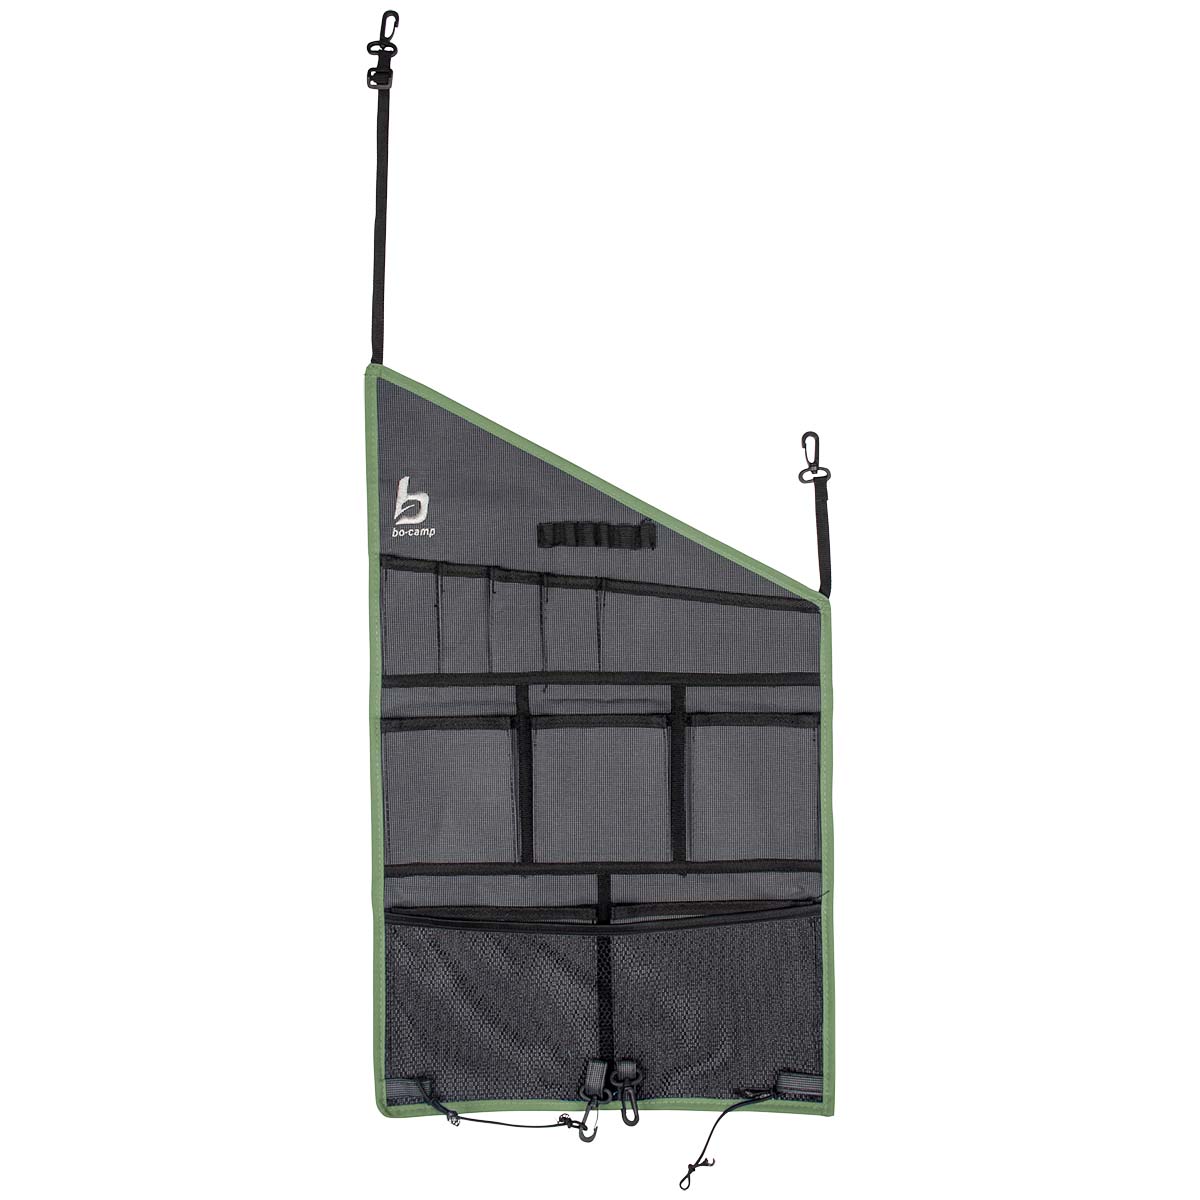 1771511 A unique tent organiser especially designed for dome tents. Thanks to the obliquely cut design at the top, it fits perfectly in a dome tent. Easy to attach, with 11 storage compartments. The tent organiser is made of a high quality Two-Tone 600D Oxford Polyester.